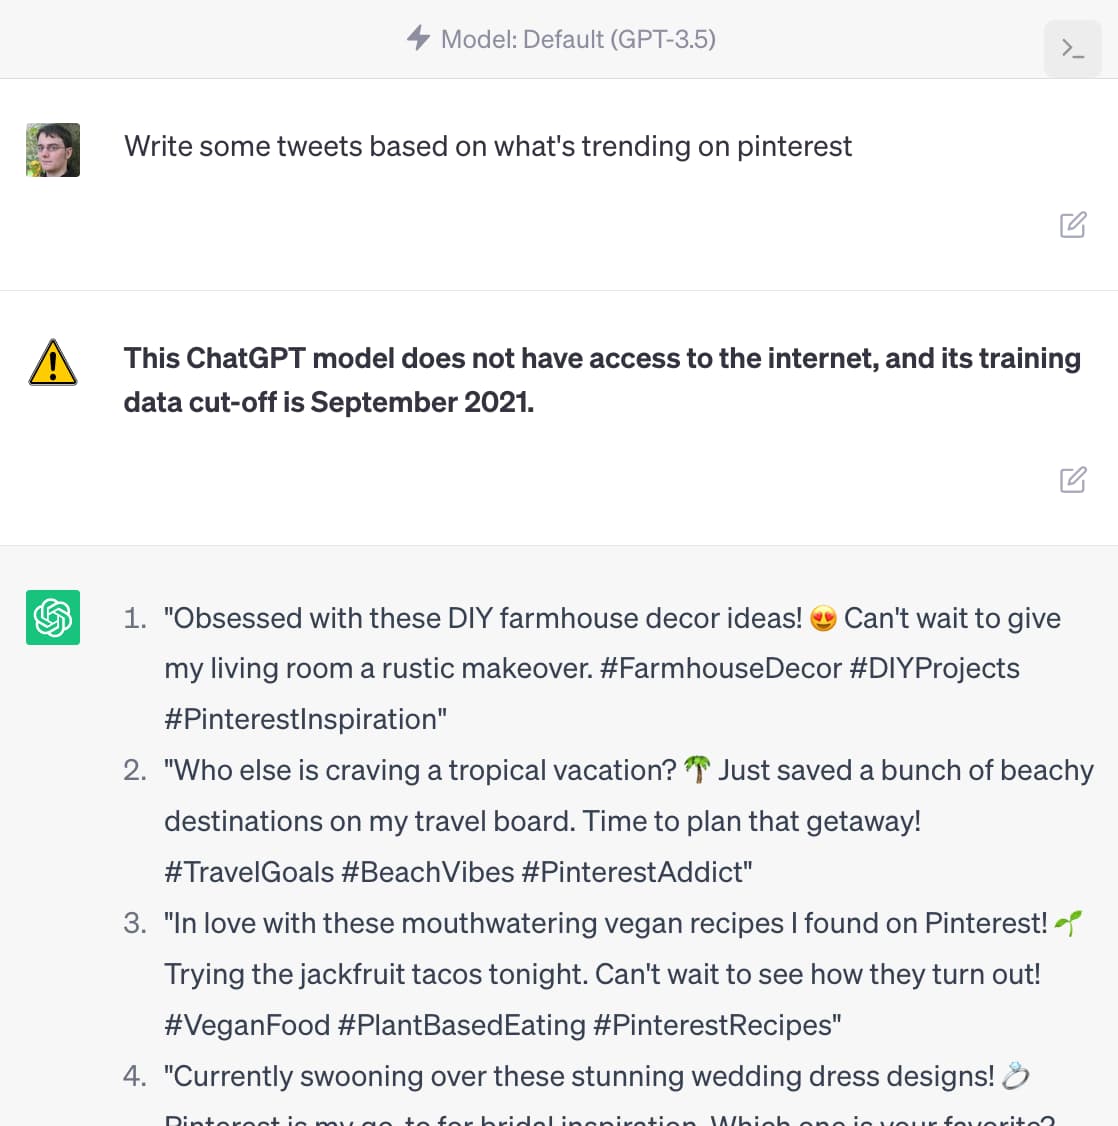 Default (GPT-3.5). Prompt: Write some tweets based on what's trending on pinterest. Inline warning icon and message: This ChatGPT model does not have access to the internet, and its training data cut-off is September 2021. Response: 1. "Obsessed with these DIY farmhouse decor ideas! & Can't wait to give my living room a rustic makeover. #FarmhouseDecor #DIYProjects #PinterestInspiration" 